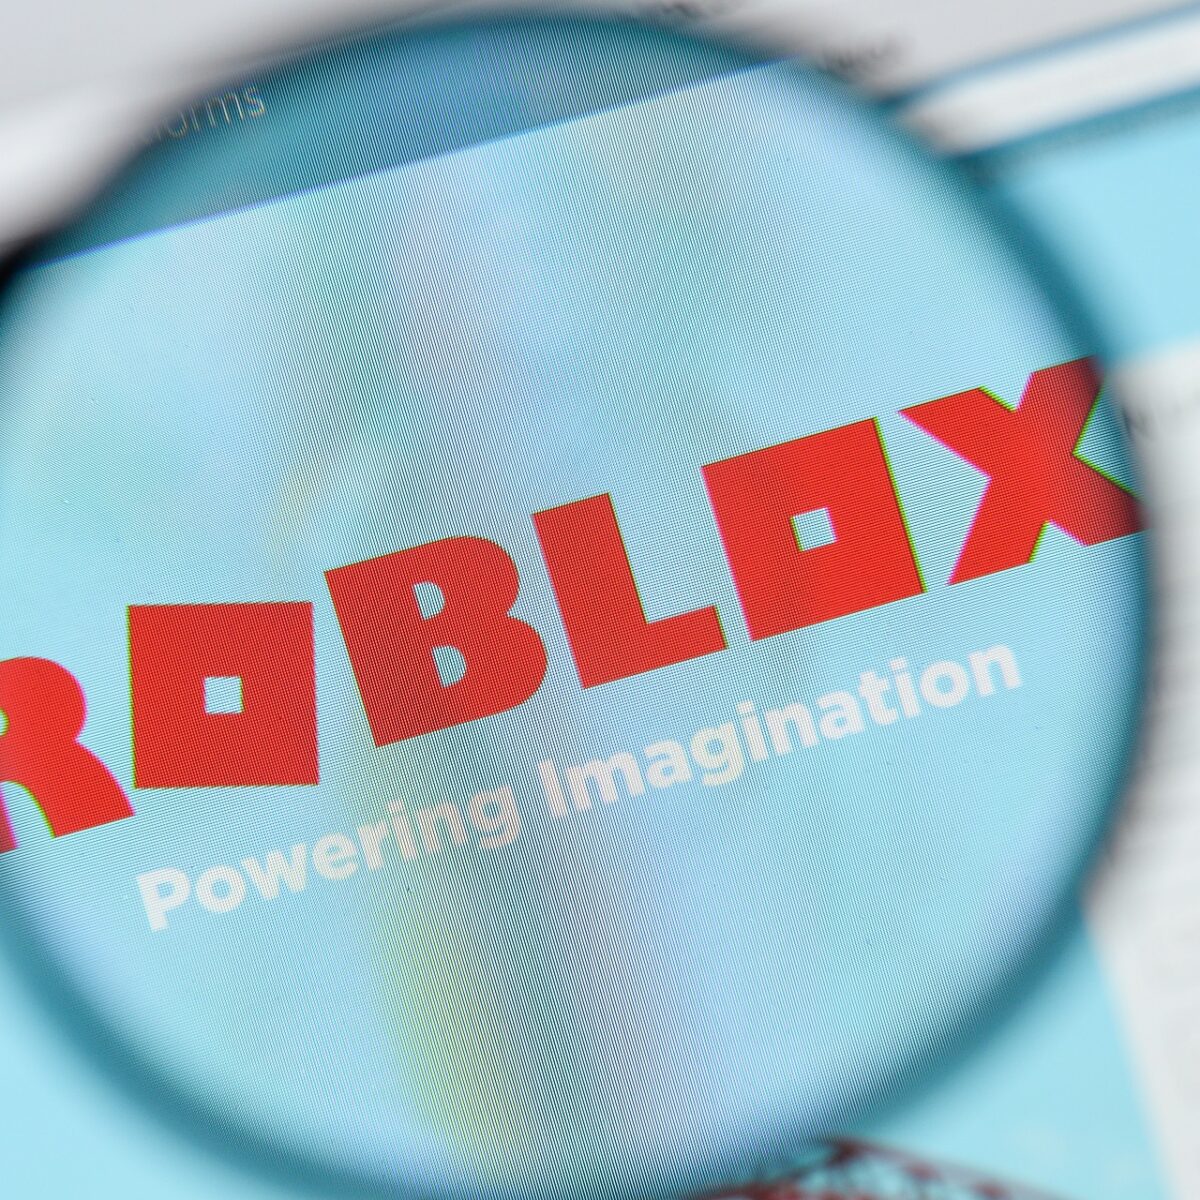 Fix Your Browser Is Not Supported Roblox Error - install roblox popup shows old logo website bugs roblox